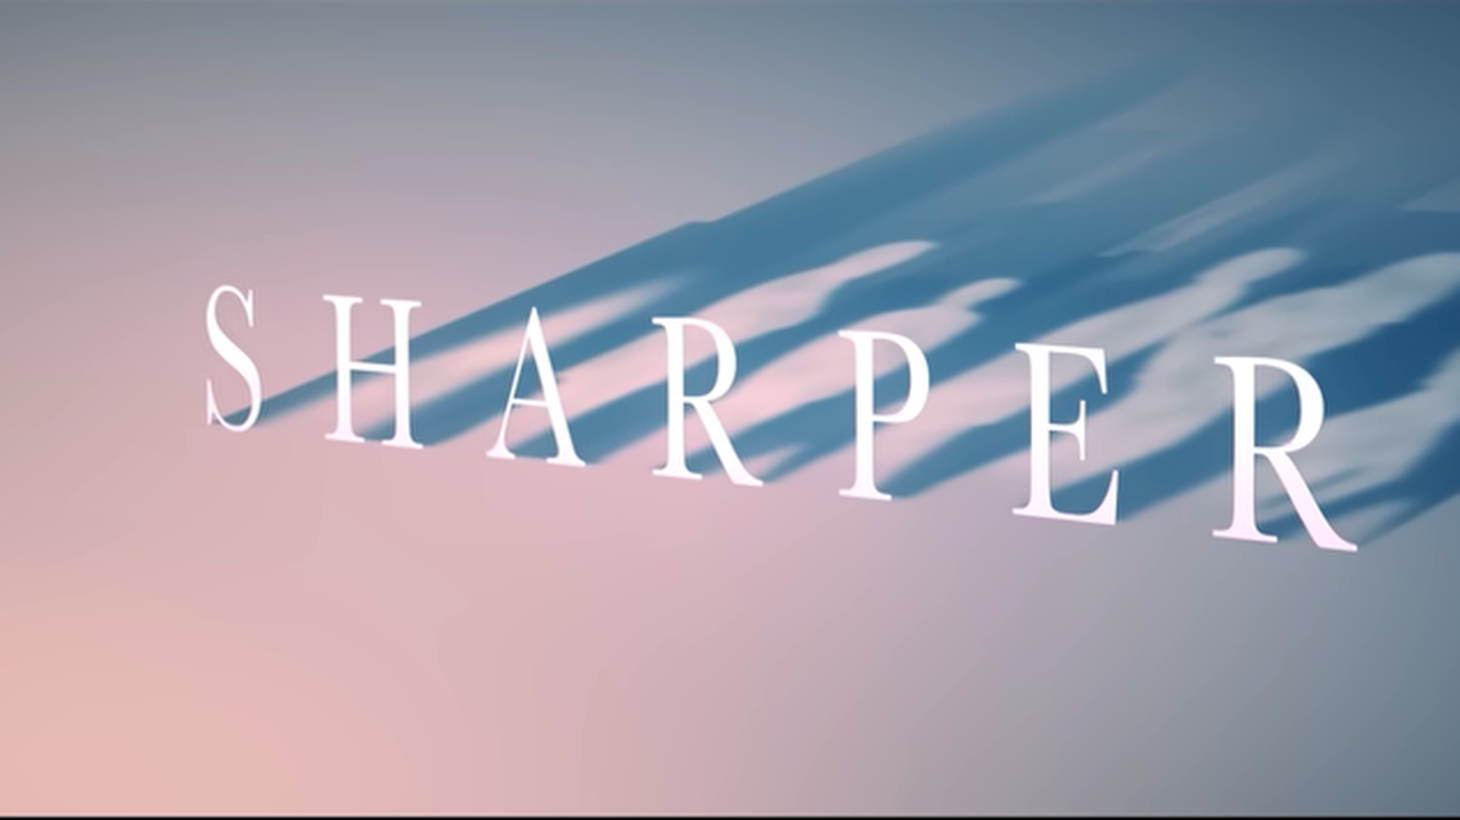 “Sharper” is a psychological thriller about billionaires and con artists, starring Julianne Moore, John Lithgow, and Sabastian Stan.